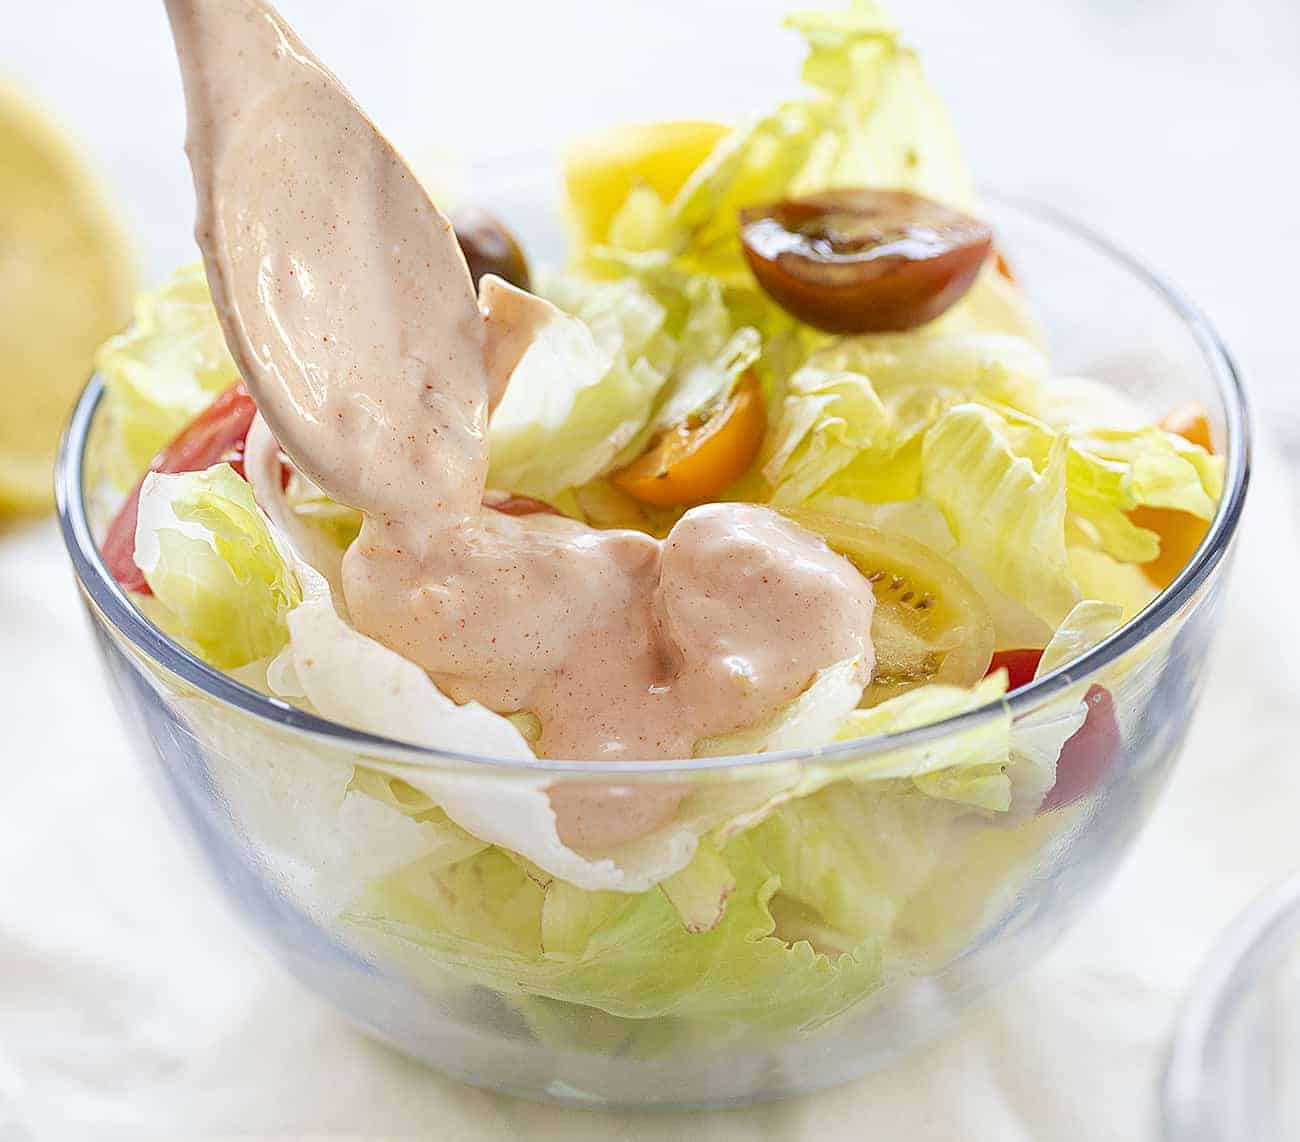 Pouring Homemade Russian Dressing on a lettuce salad